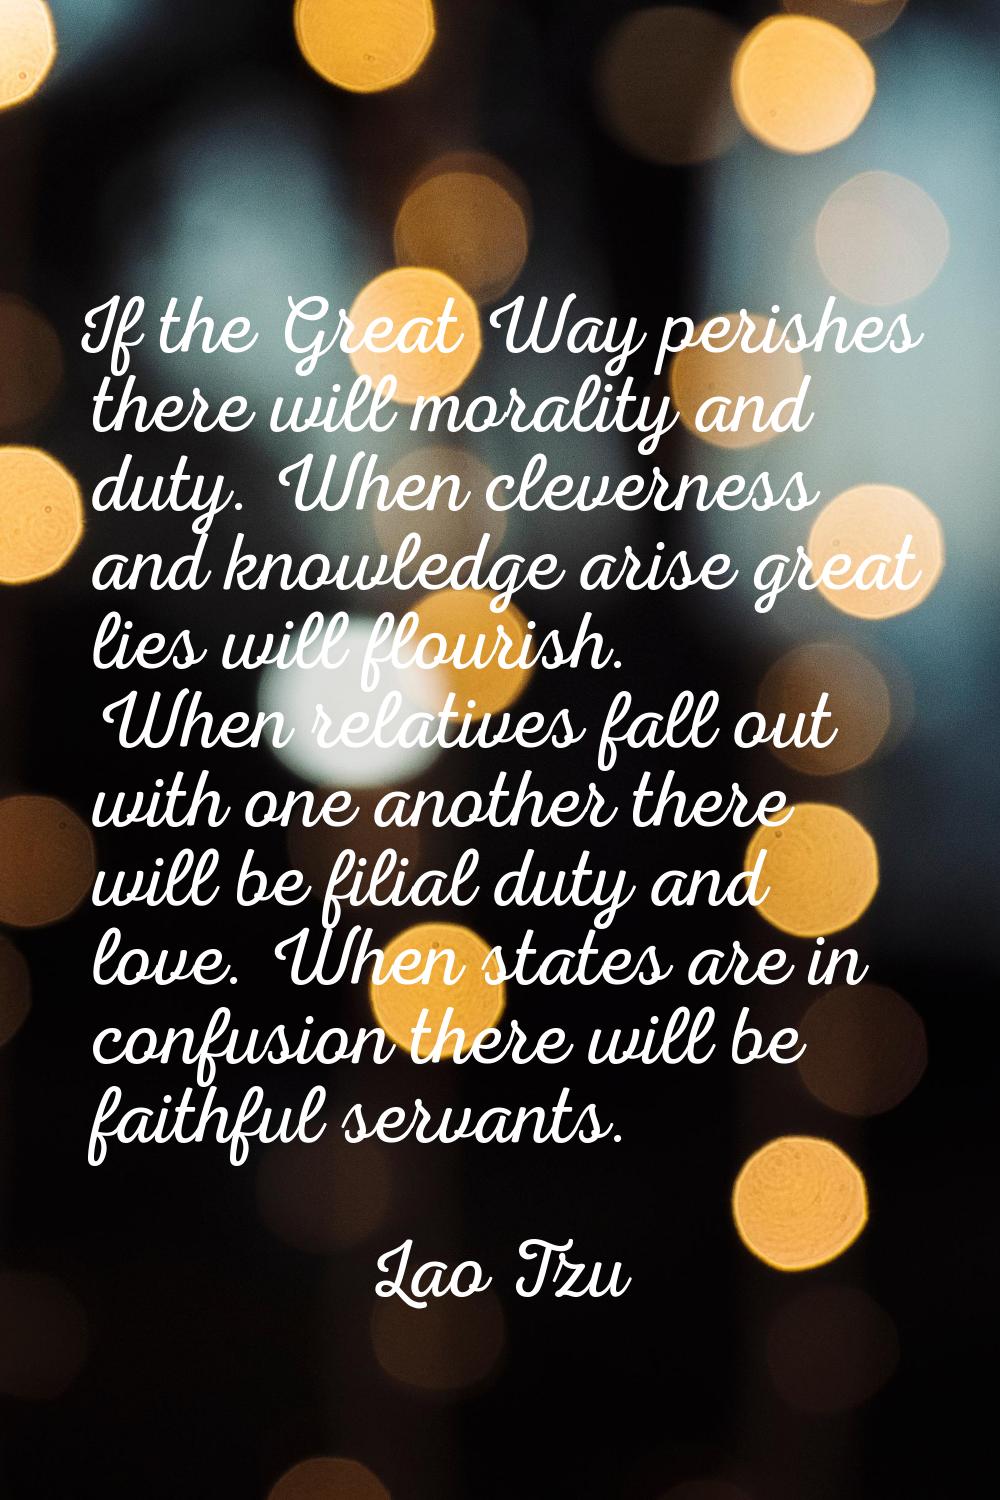 If the Great Way perishes there will morality and duty. When cleverness and knowledge arise great l